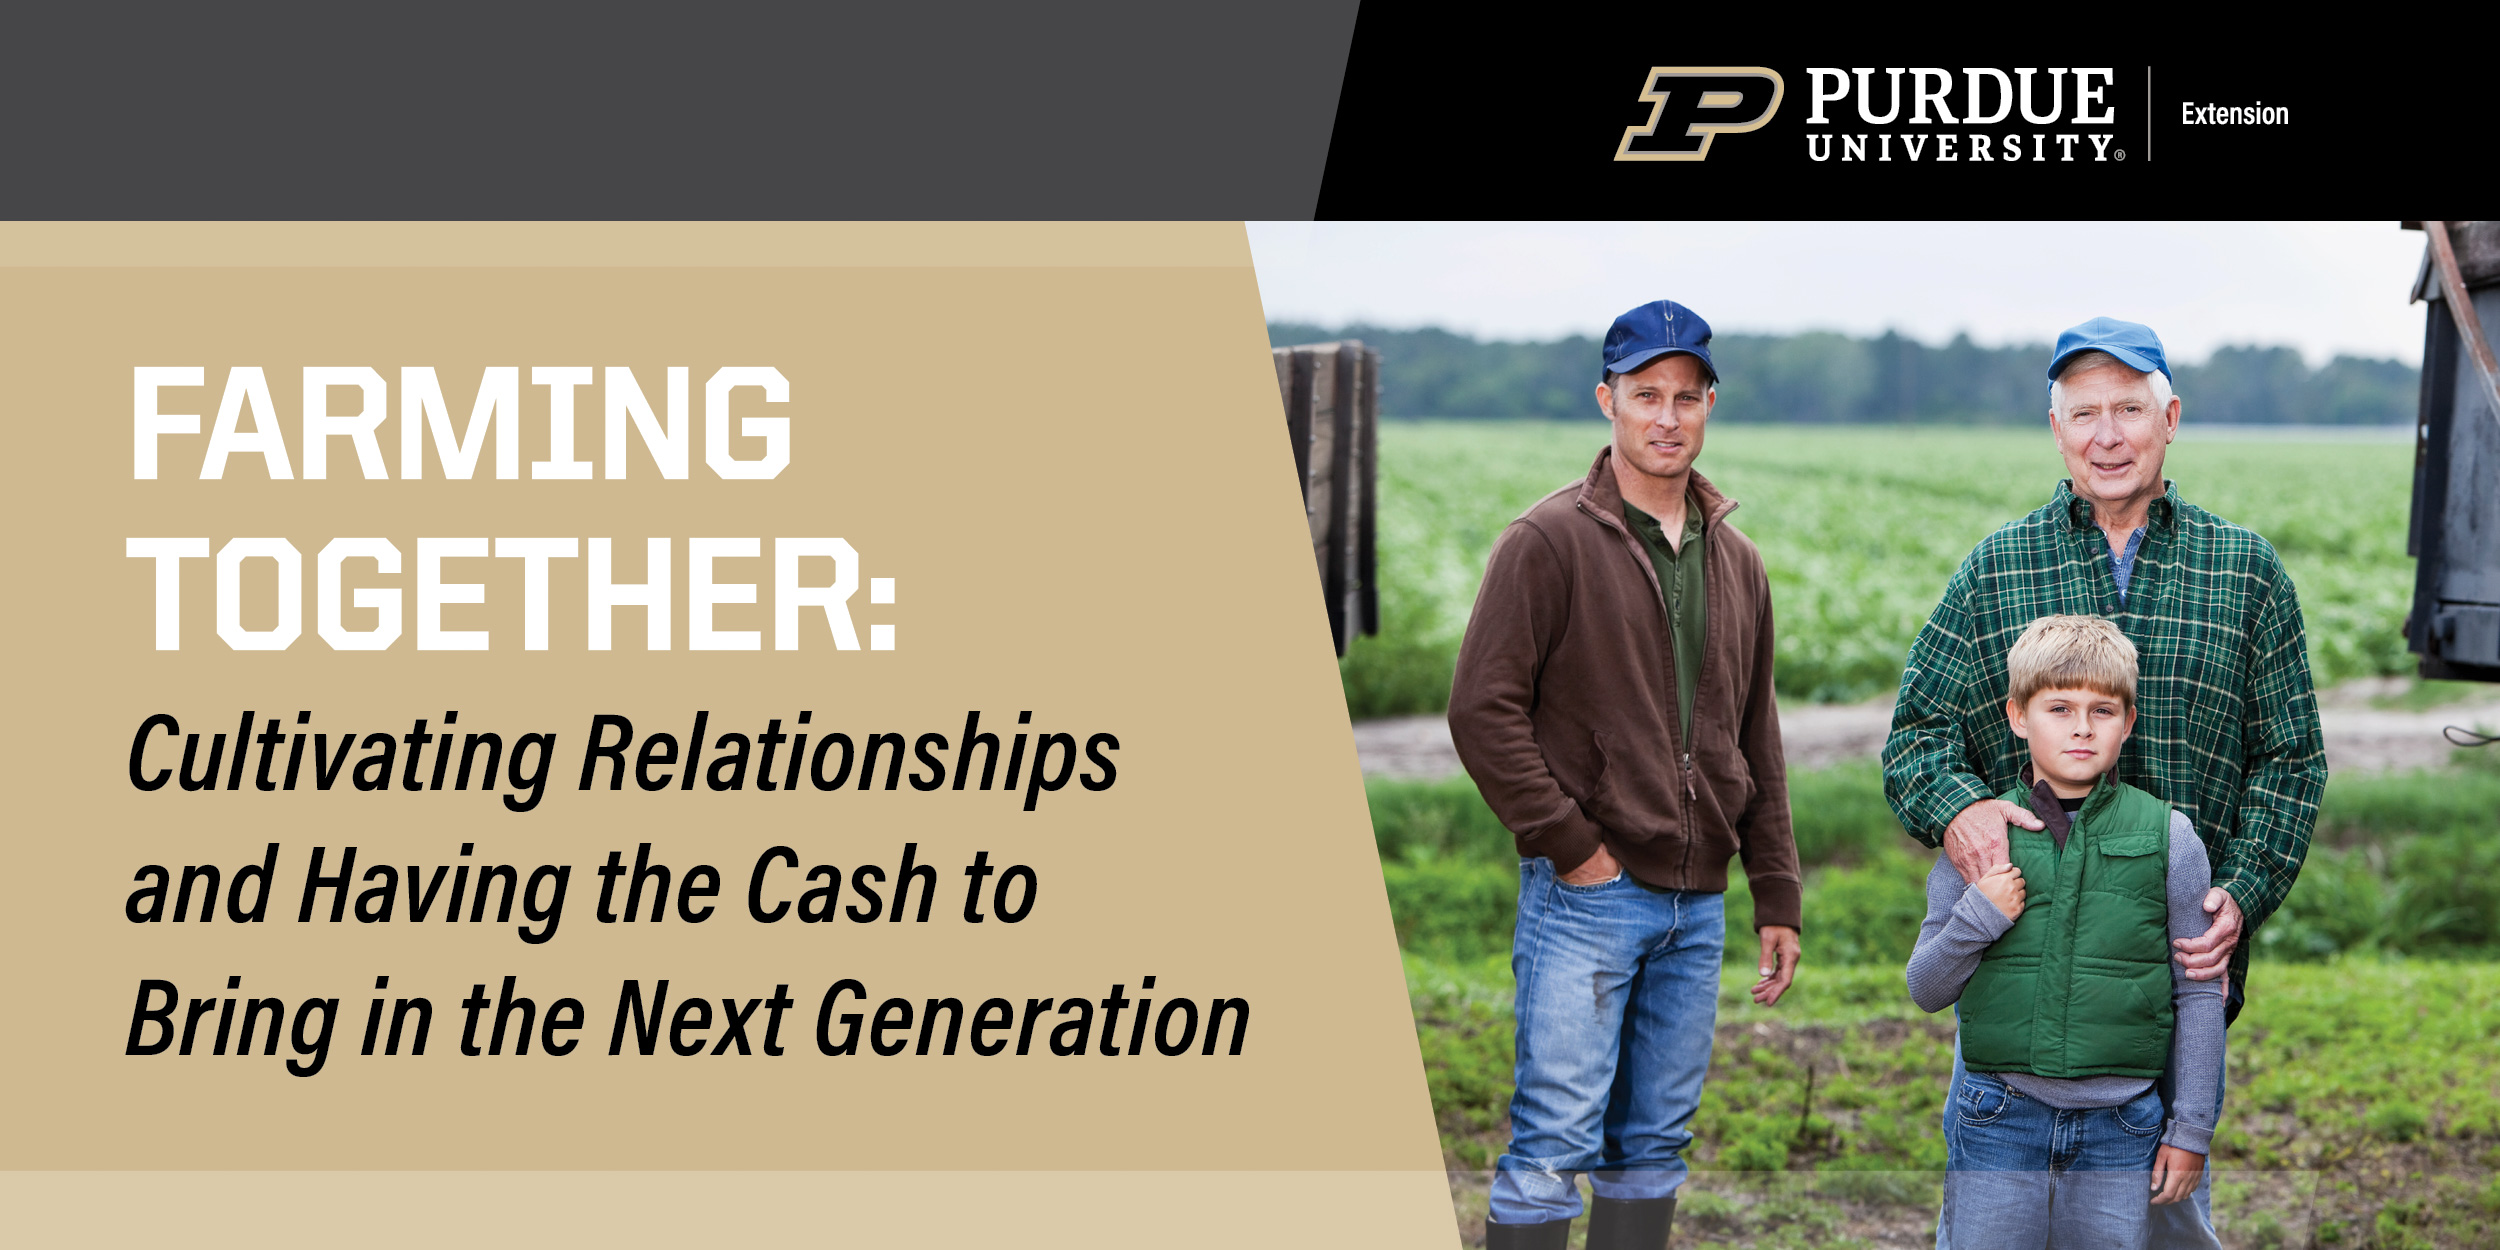 Farming Together: Cultivating relationships and having the cash to bring the next generation. farming generations standing together in a field